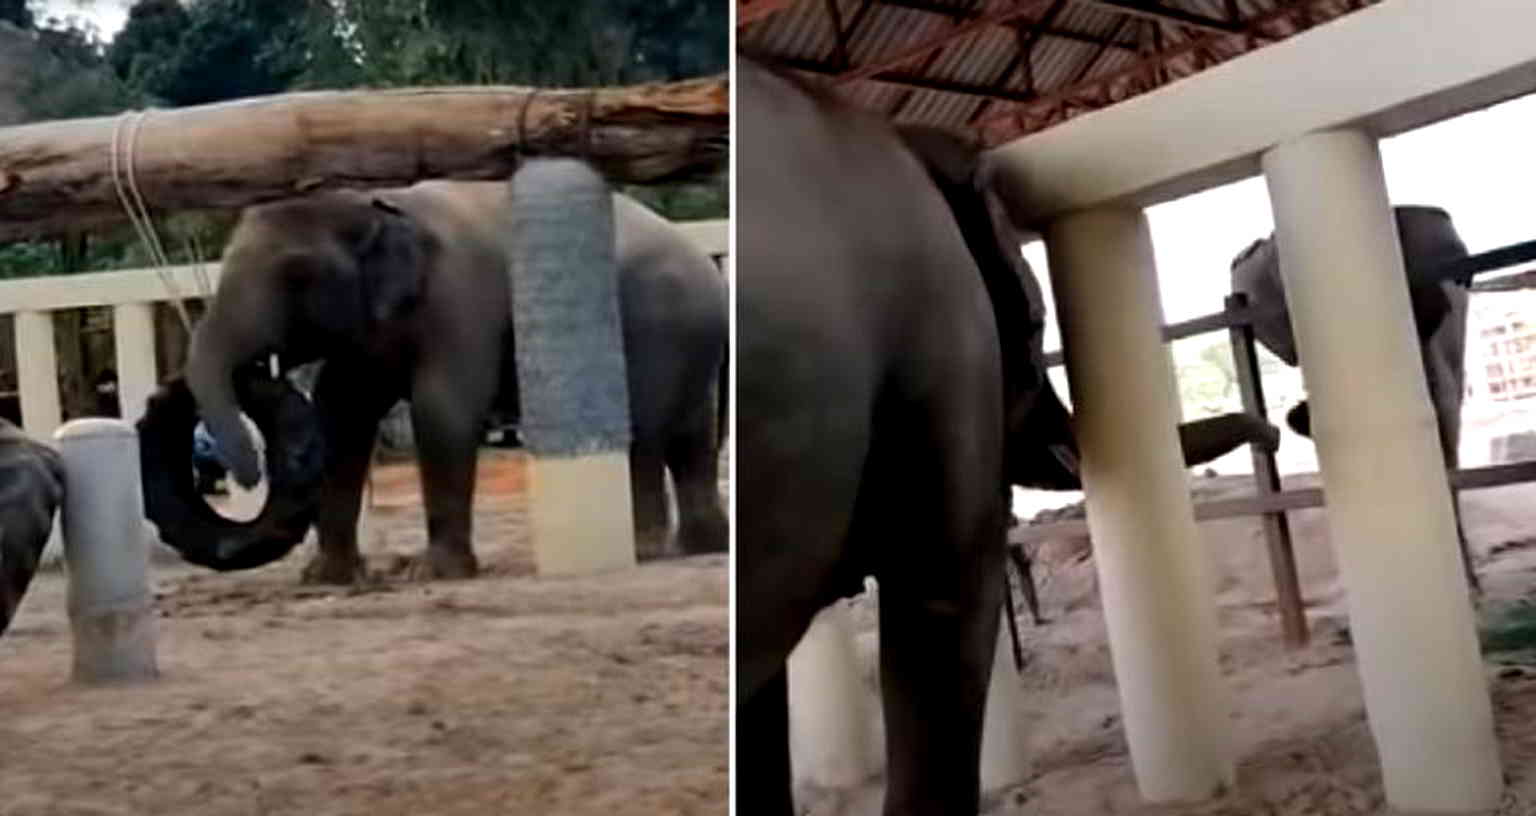 ‘World’s Loneliest Elephant’ Meets First Friend in 8 Years at New Home in Cambodia